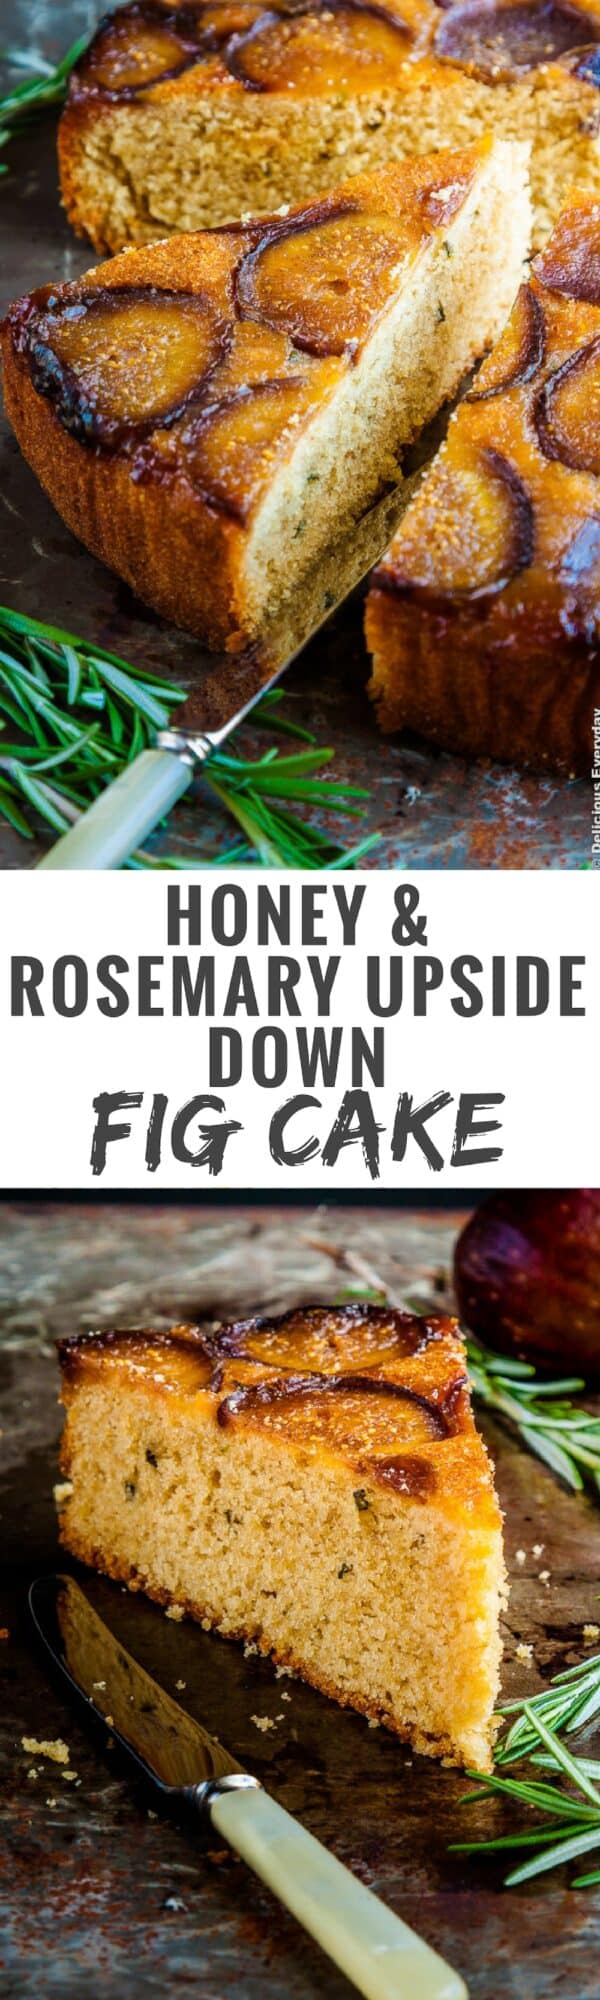 This Upside Down Fig Cake is a beautiful cake, with a tender crumb, and a subtle surprise of rosemary. 